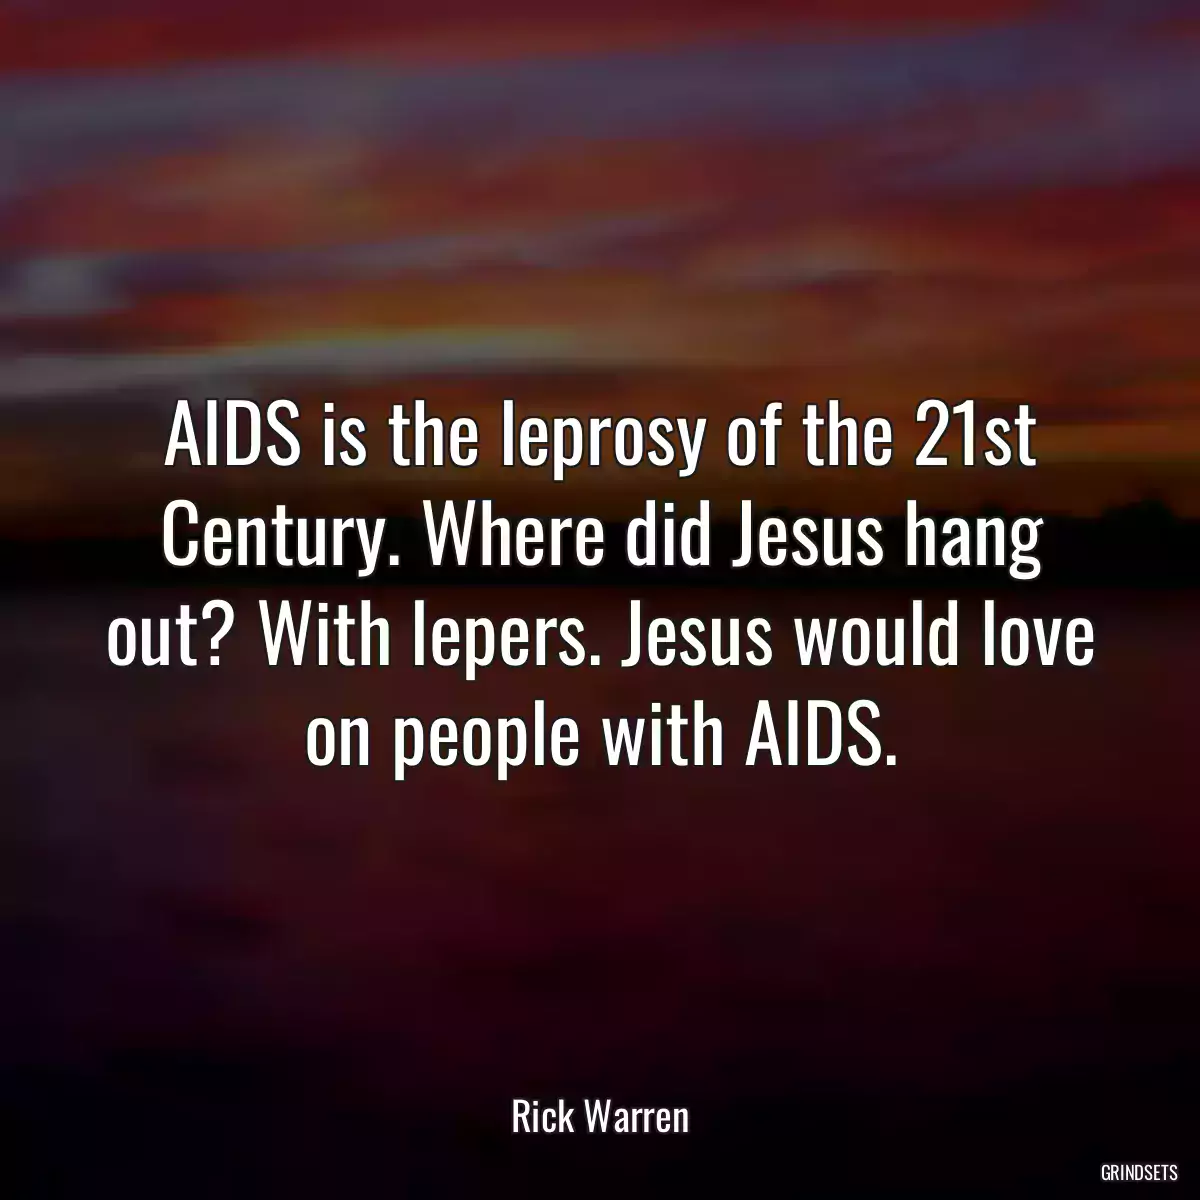 AIDS is the leprosy of the 21st Century. Where did Jesus hang out? With lepers. Jesus would love on people with AIDS.